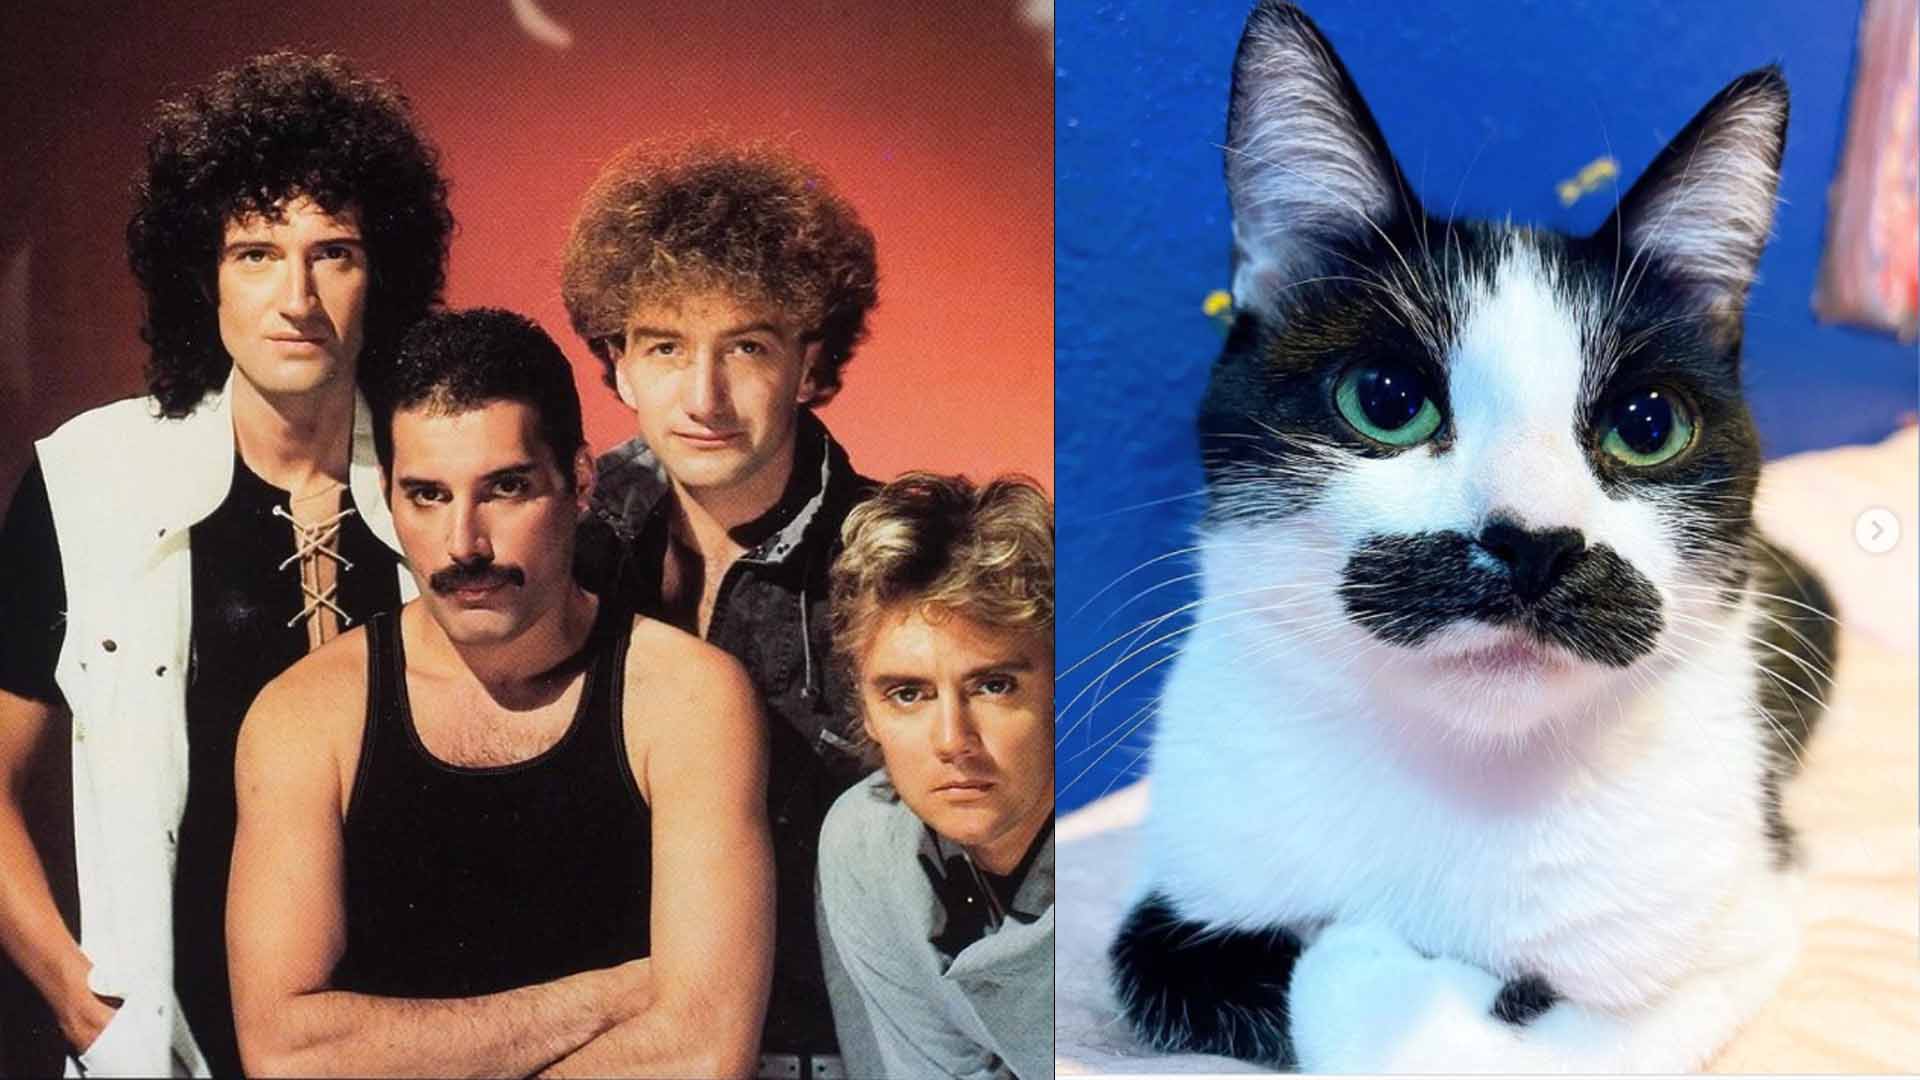 Cat With Moustache Resembling Freddie Mercury Goes Viral